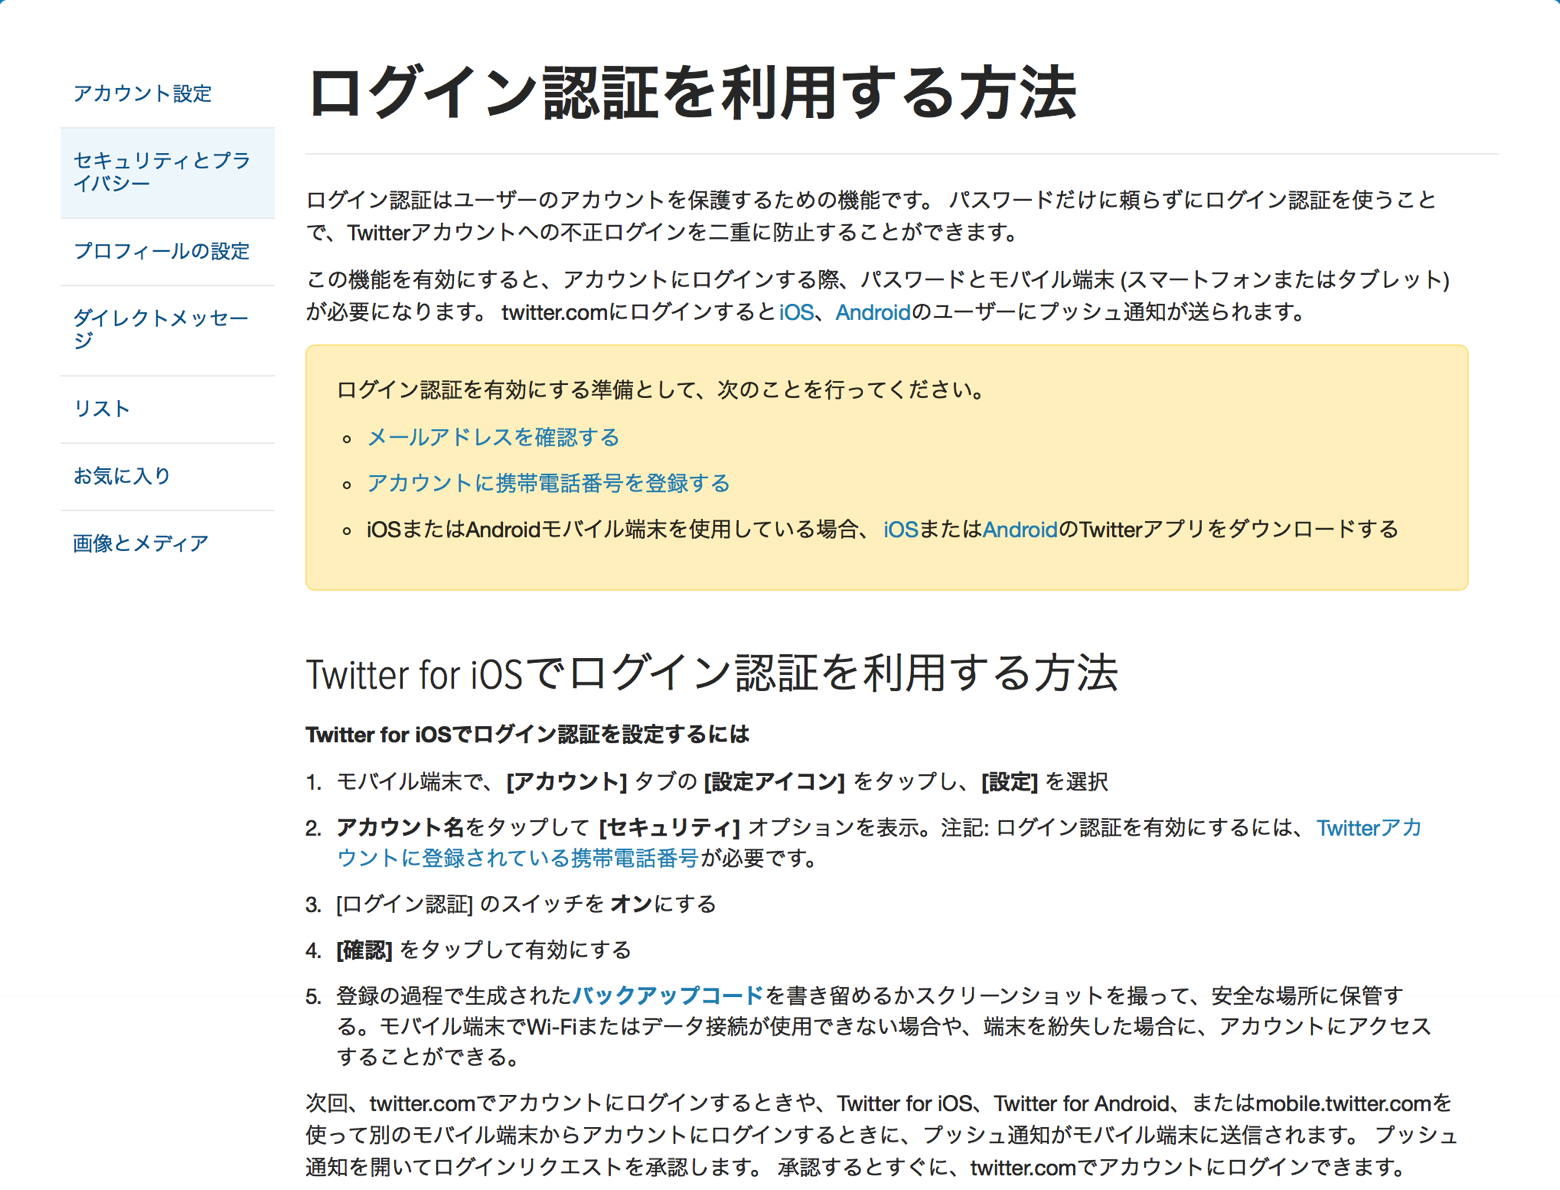 Twitter security 20150601 01